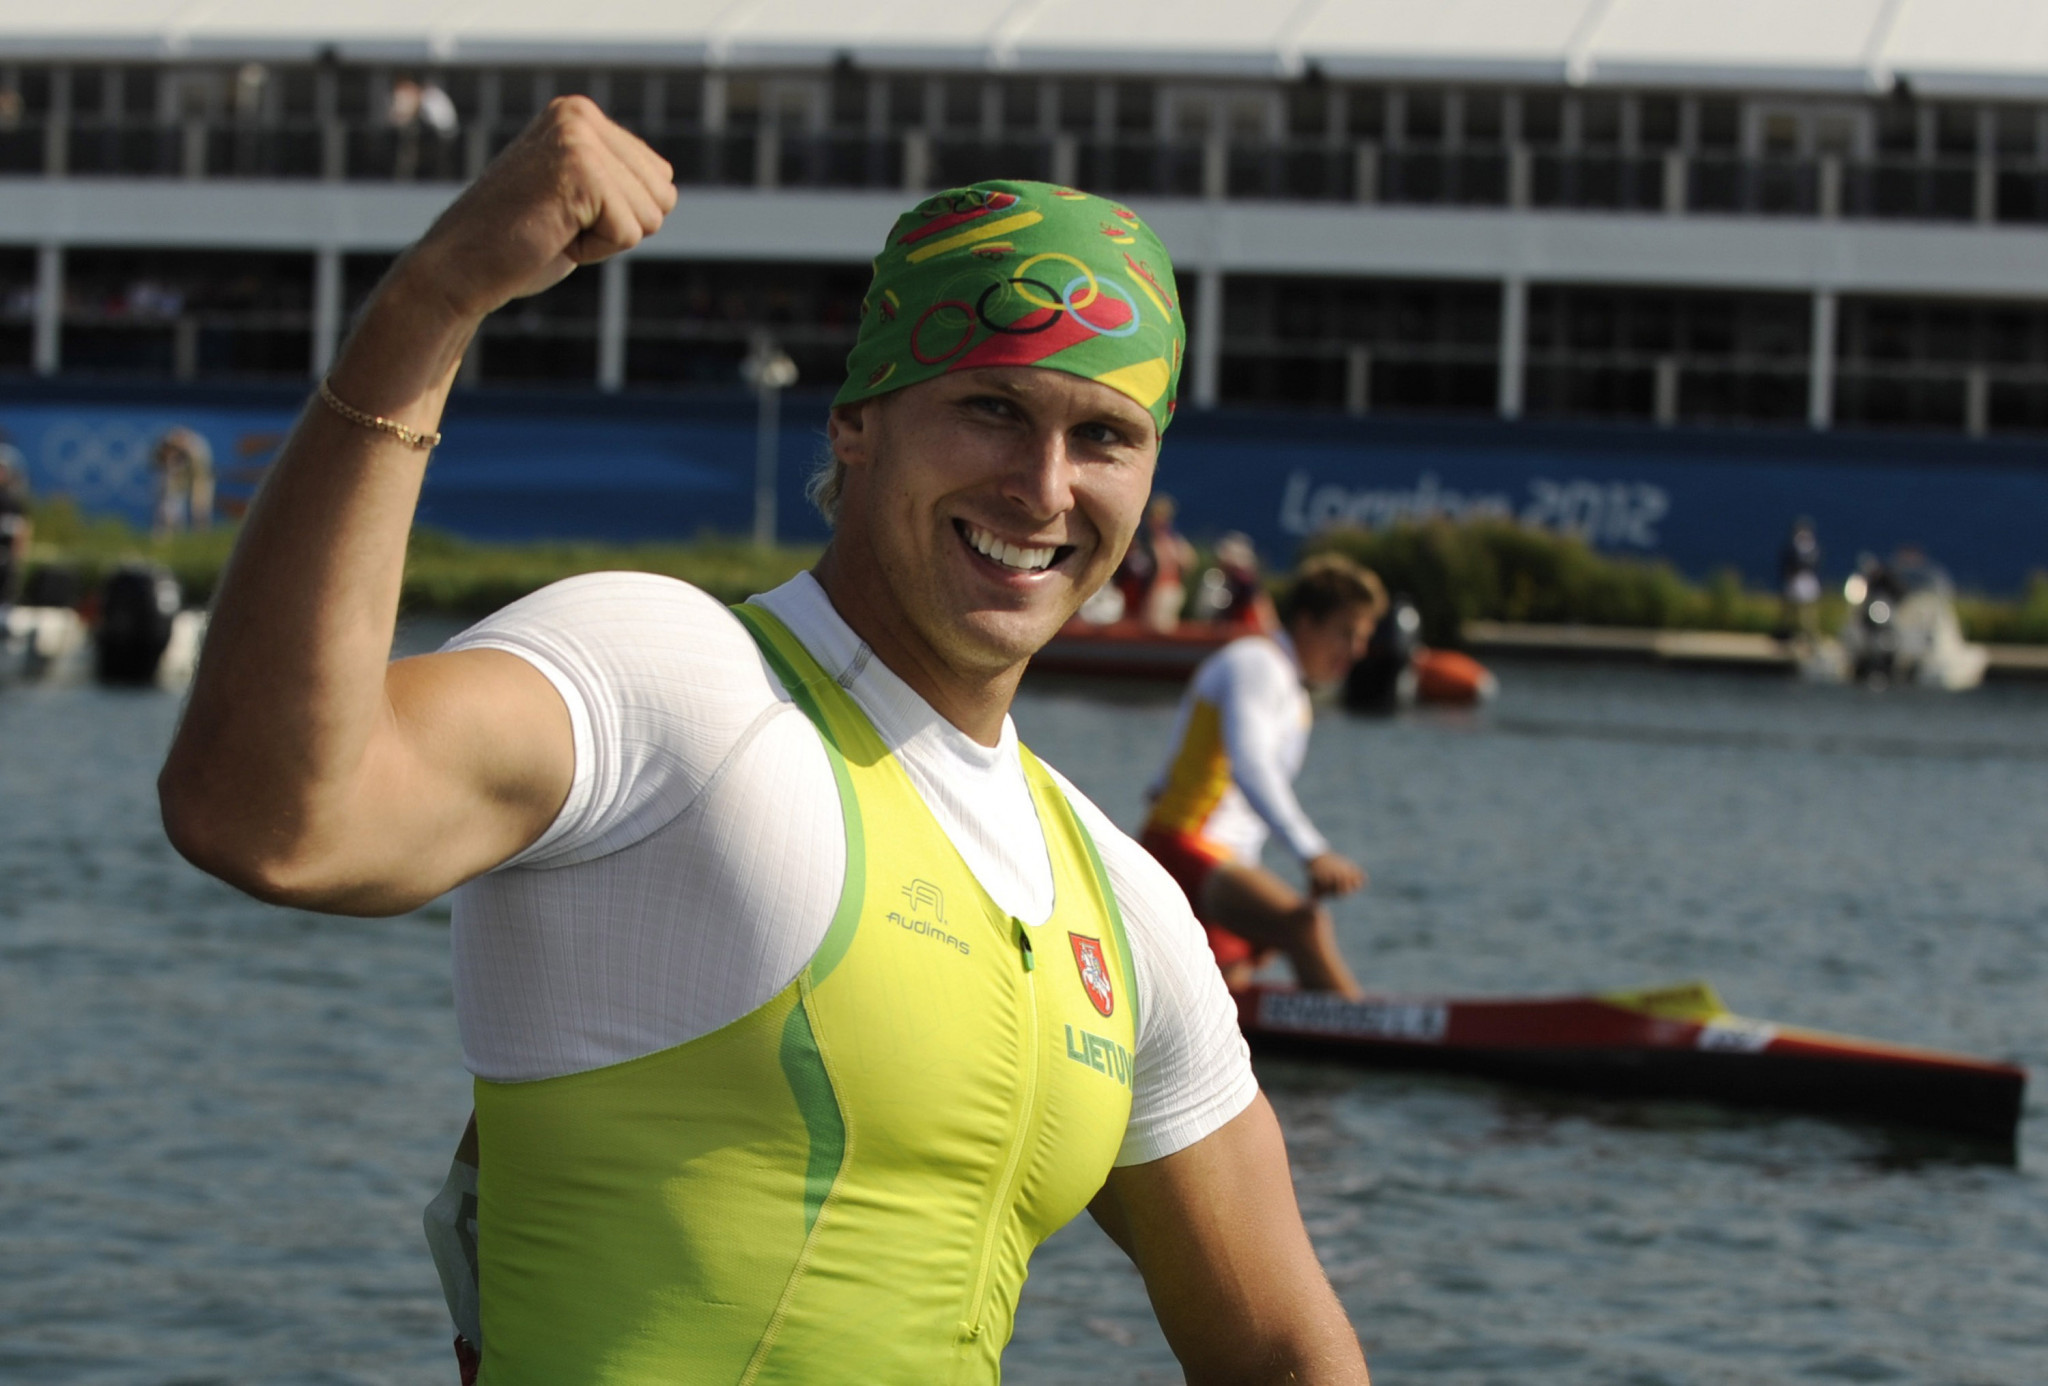 Lithuanian canoeist officially stripped of Olympic silver after confirmation of London 2012 positive